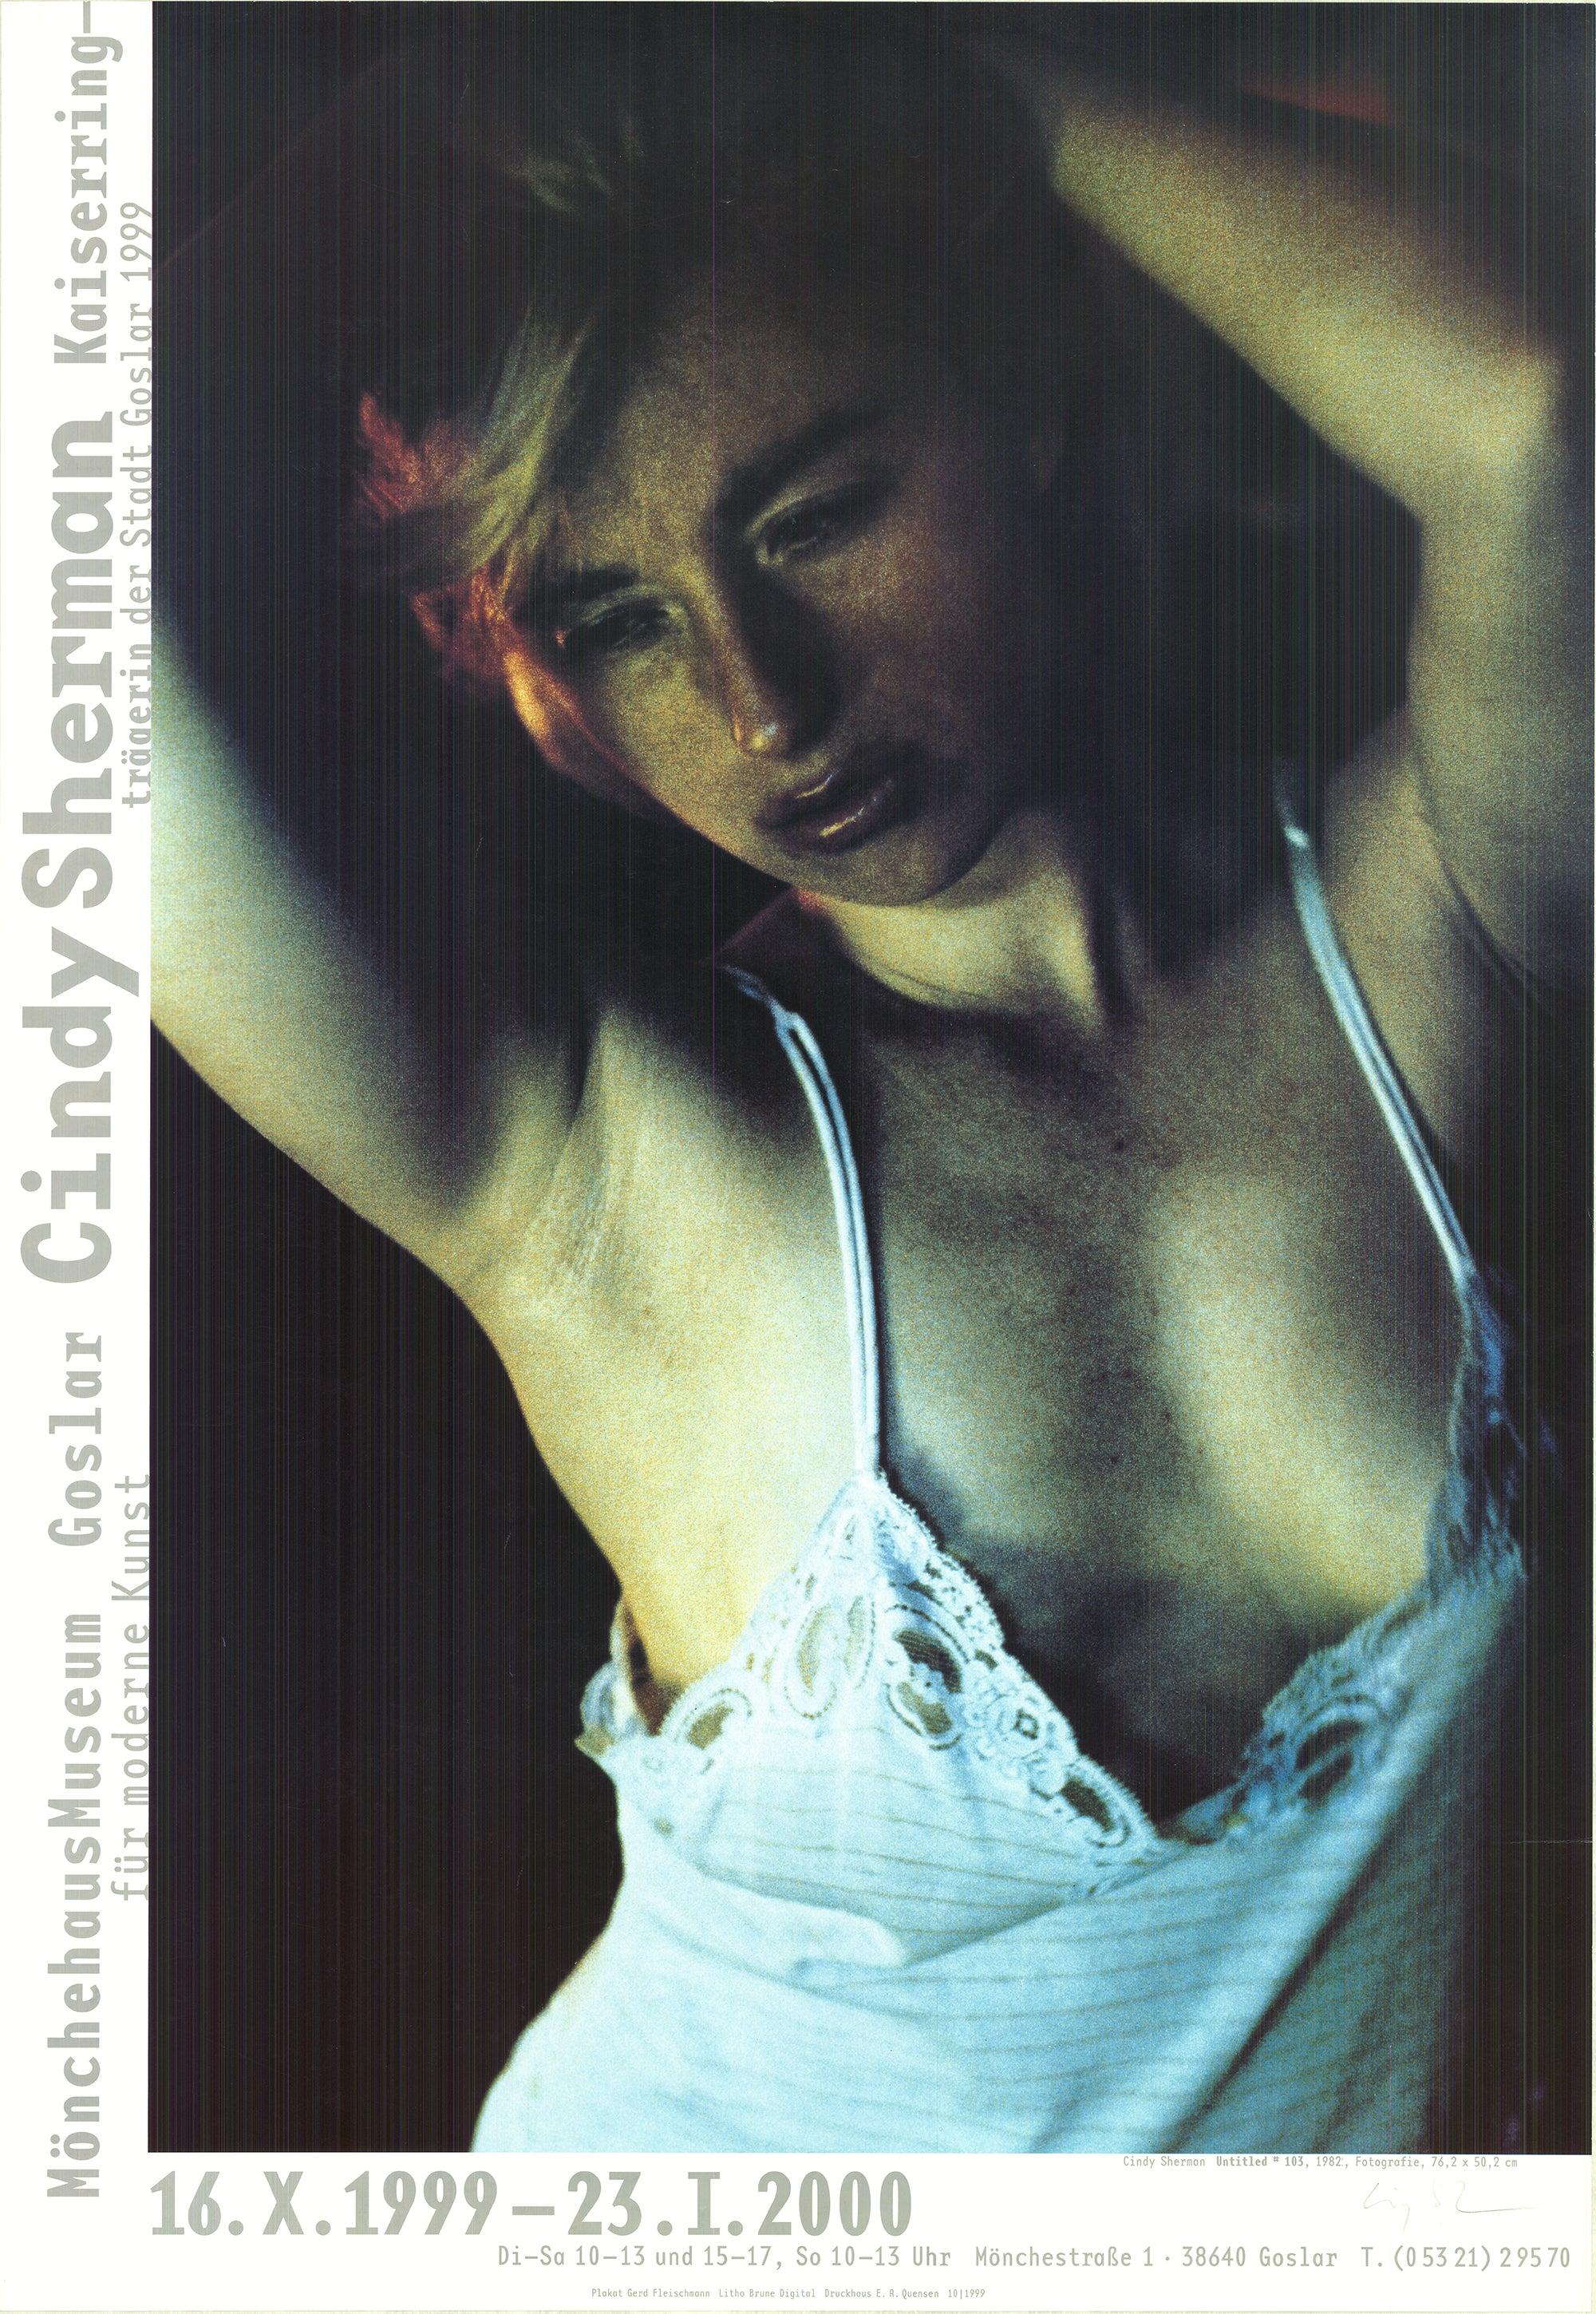 CINDY SHERMAN Untitled #103, 1999 - Hand-Signed - Print by Cindy Sherman